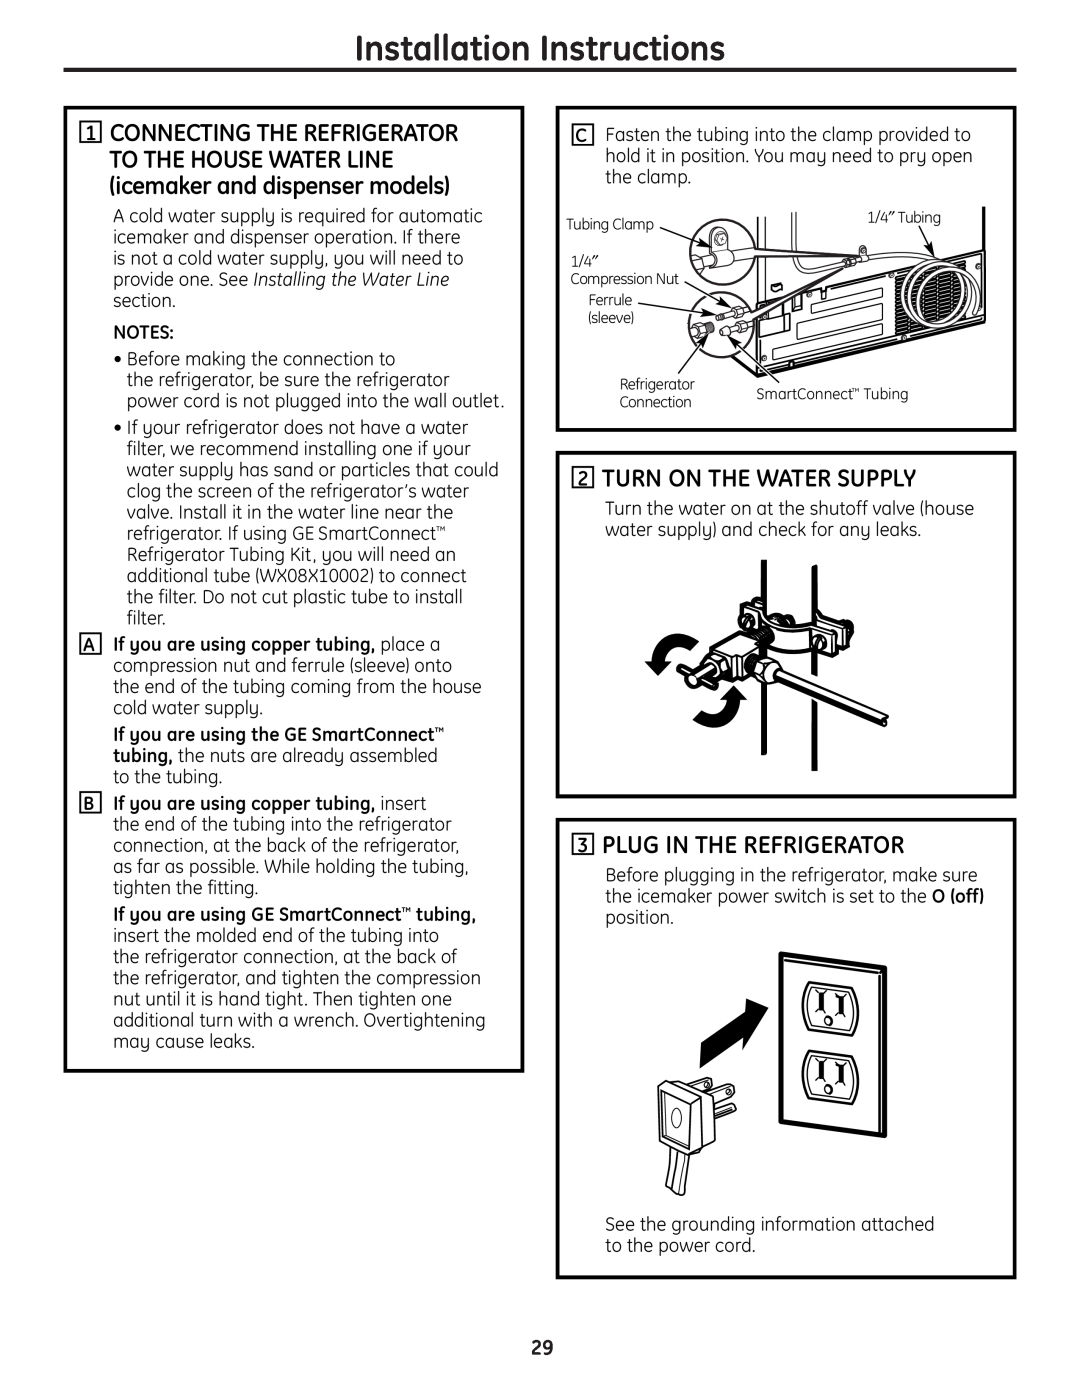 GE 23, 25, 26 installation instructions Turn On The Water Supply, Plug In The Refrigerator, Installation Instructions 